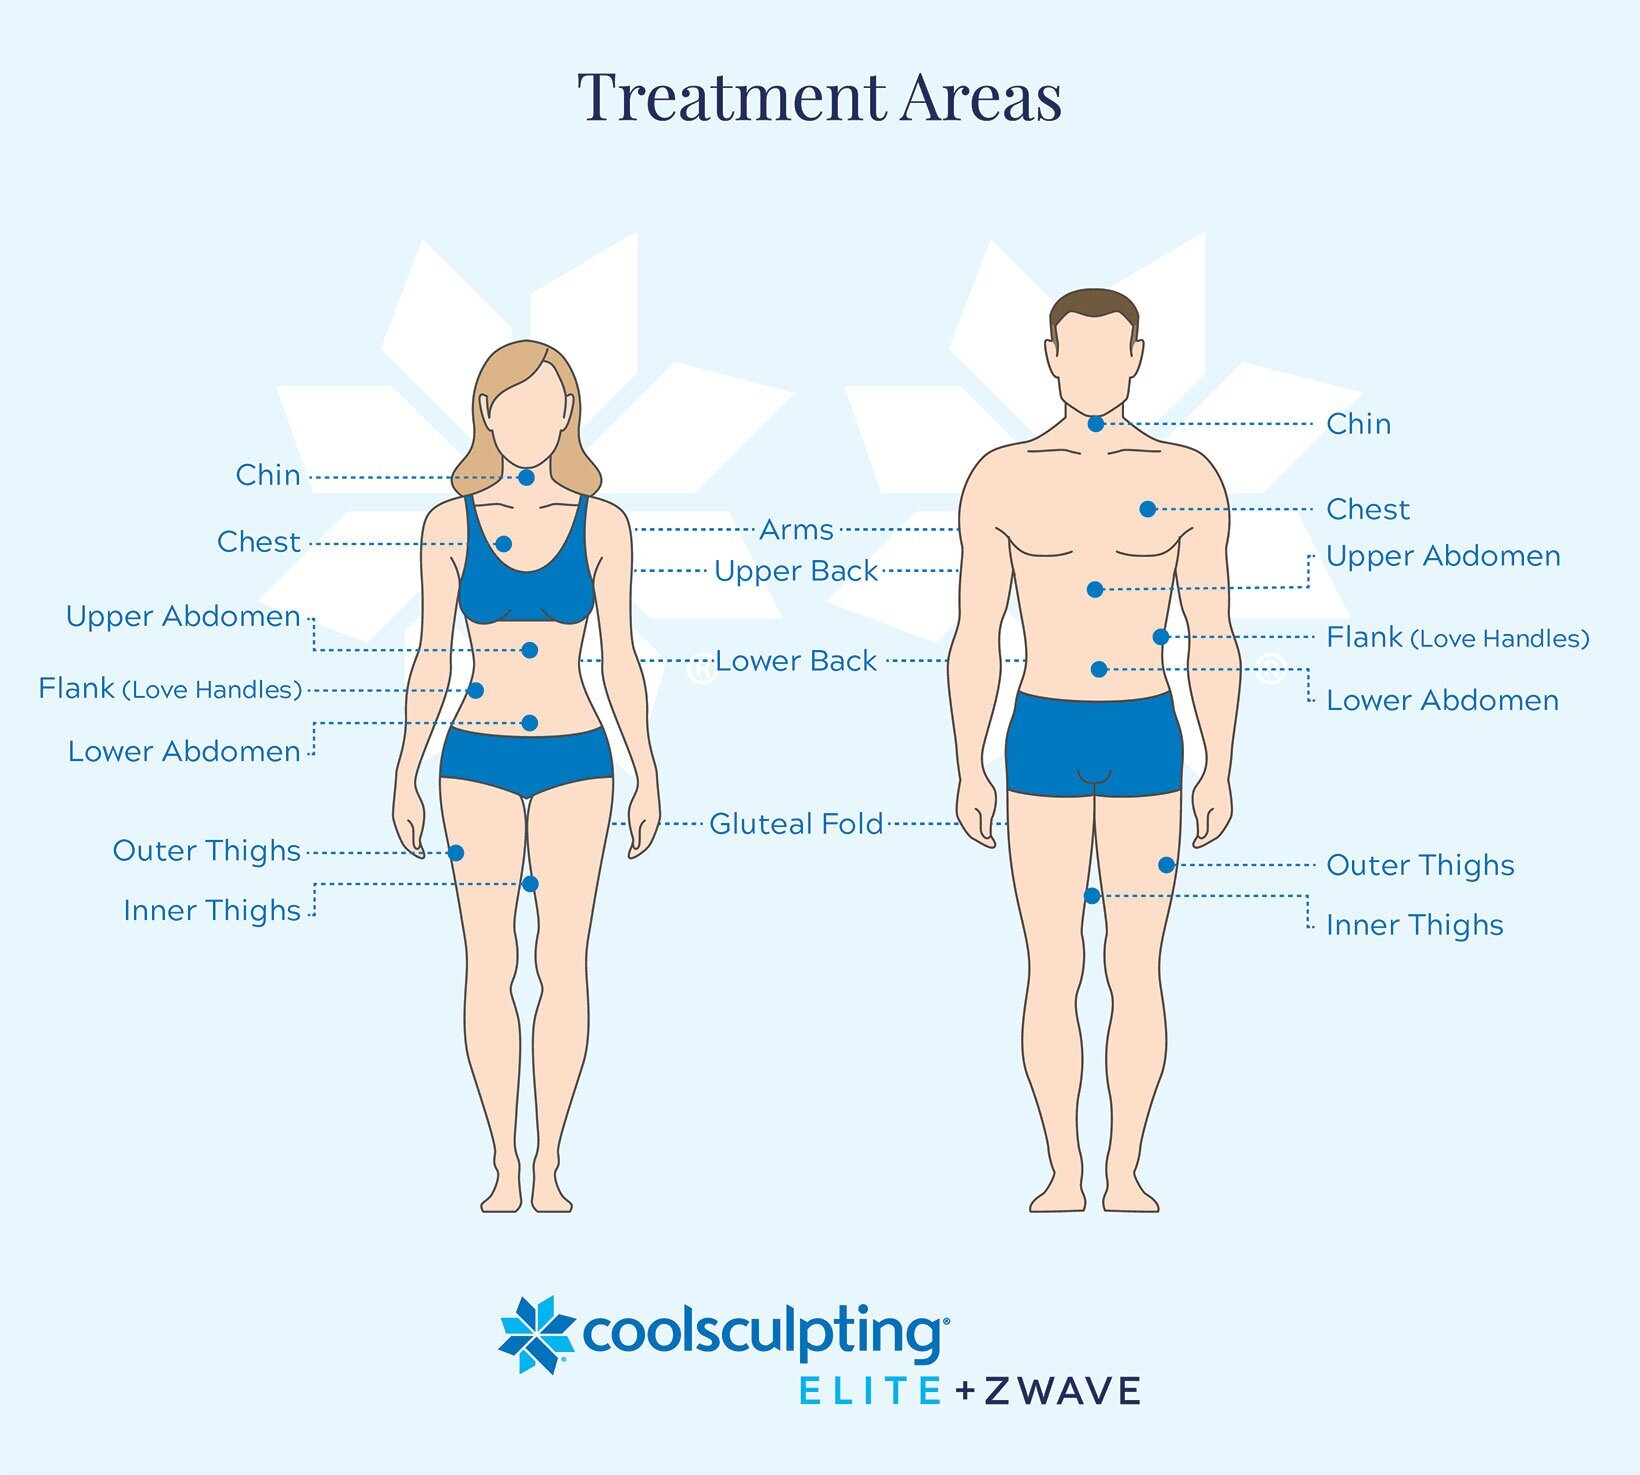 Illustration showing areas that are treatable with CoolSculpting Elite 